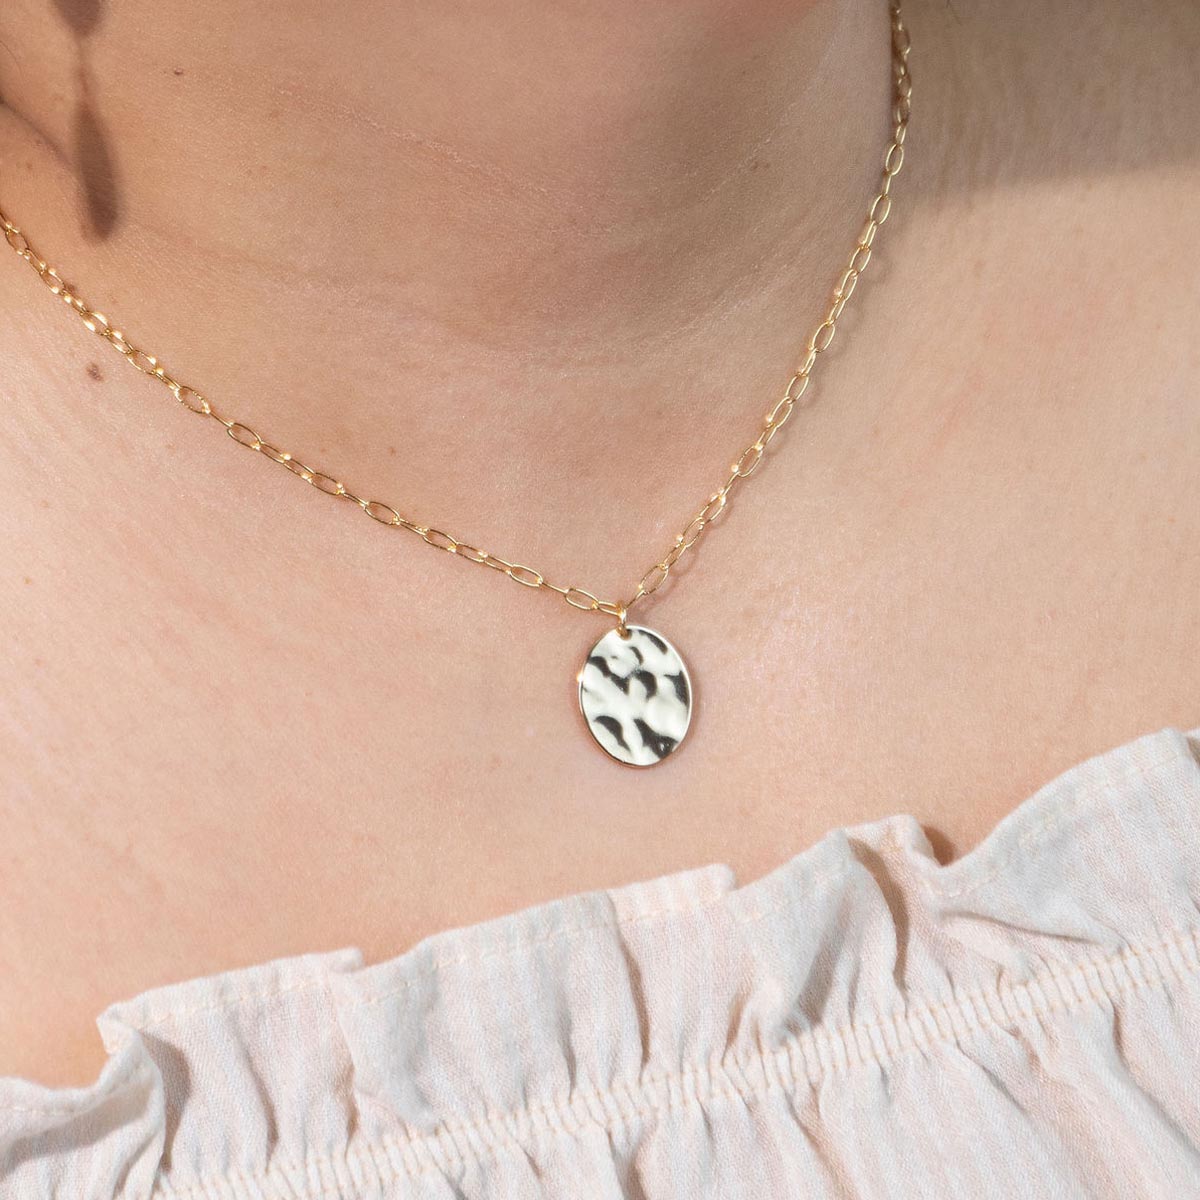 Closeup of a woman's neck modeling the Meridian Necklace, a gold hammered oval pendant on a dainty paperclip chain.